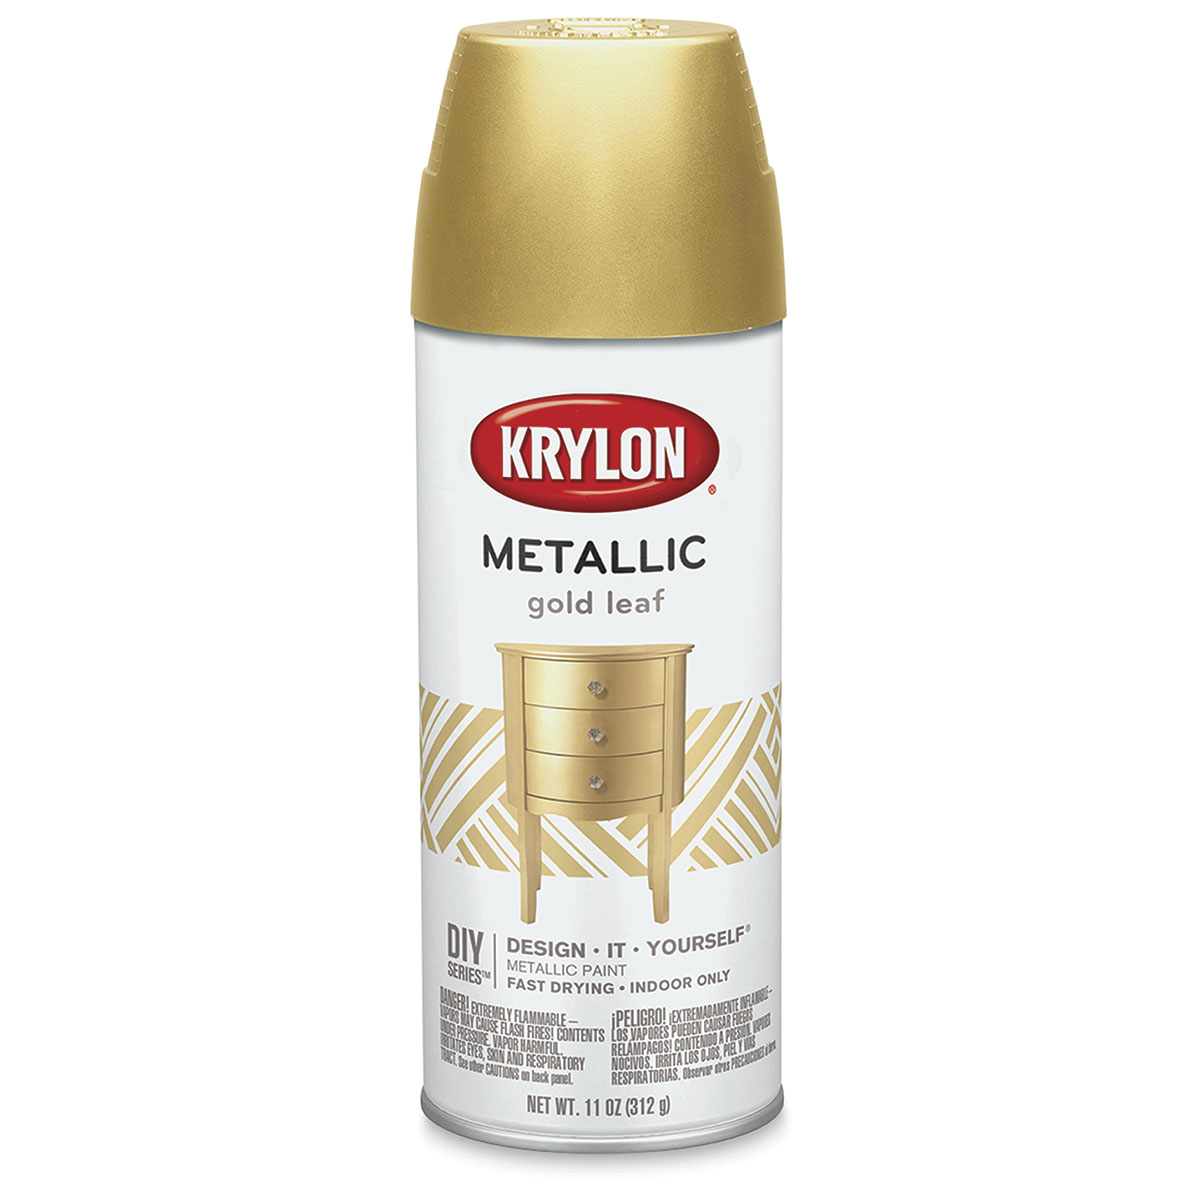 Krylon gold leaf is the best gold spray paint ever! Beautiful